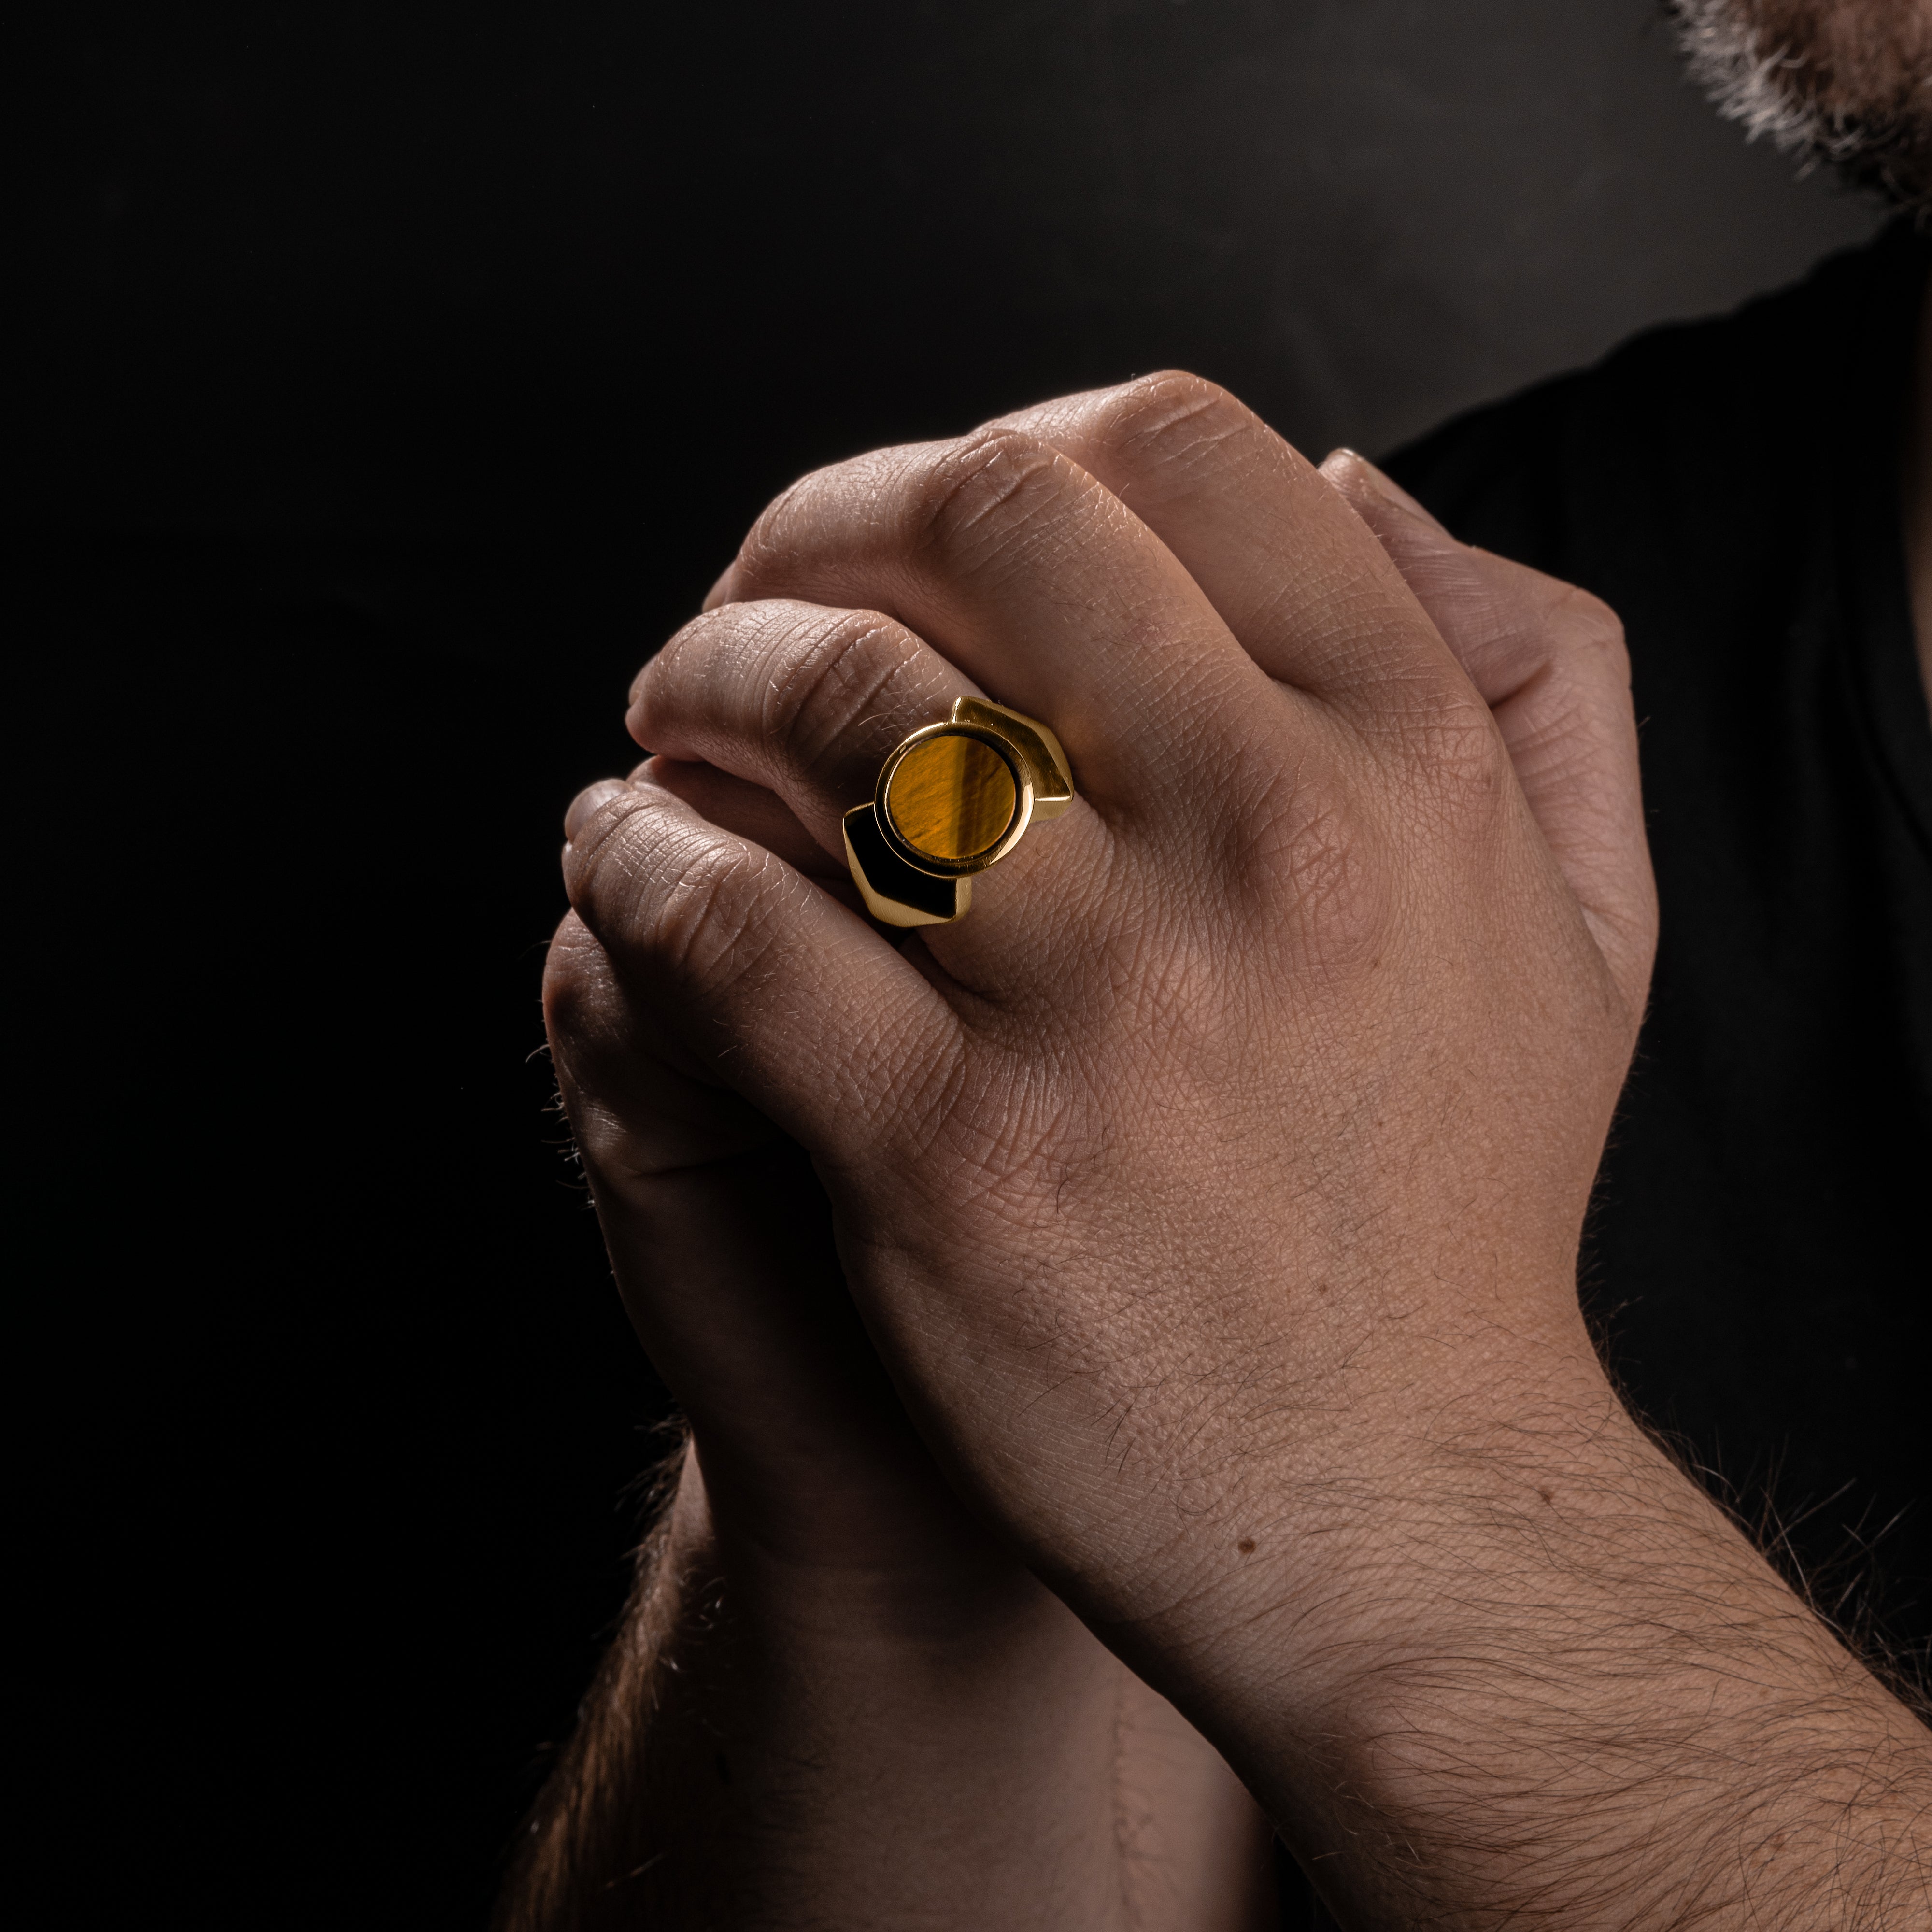 Men's Solid Gold Ring | Kudos | Seekers Men's Jewelry